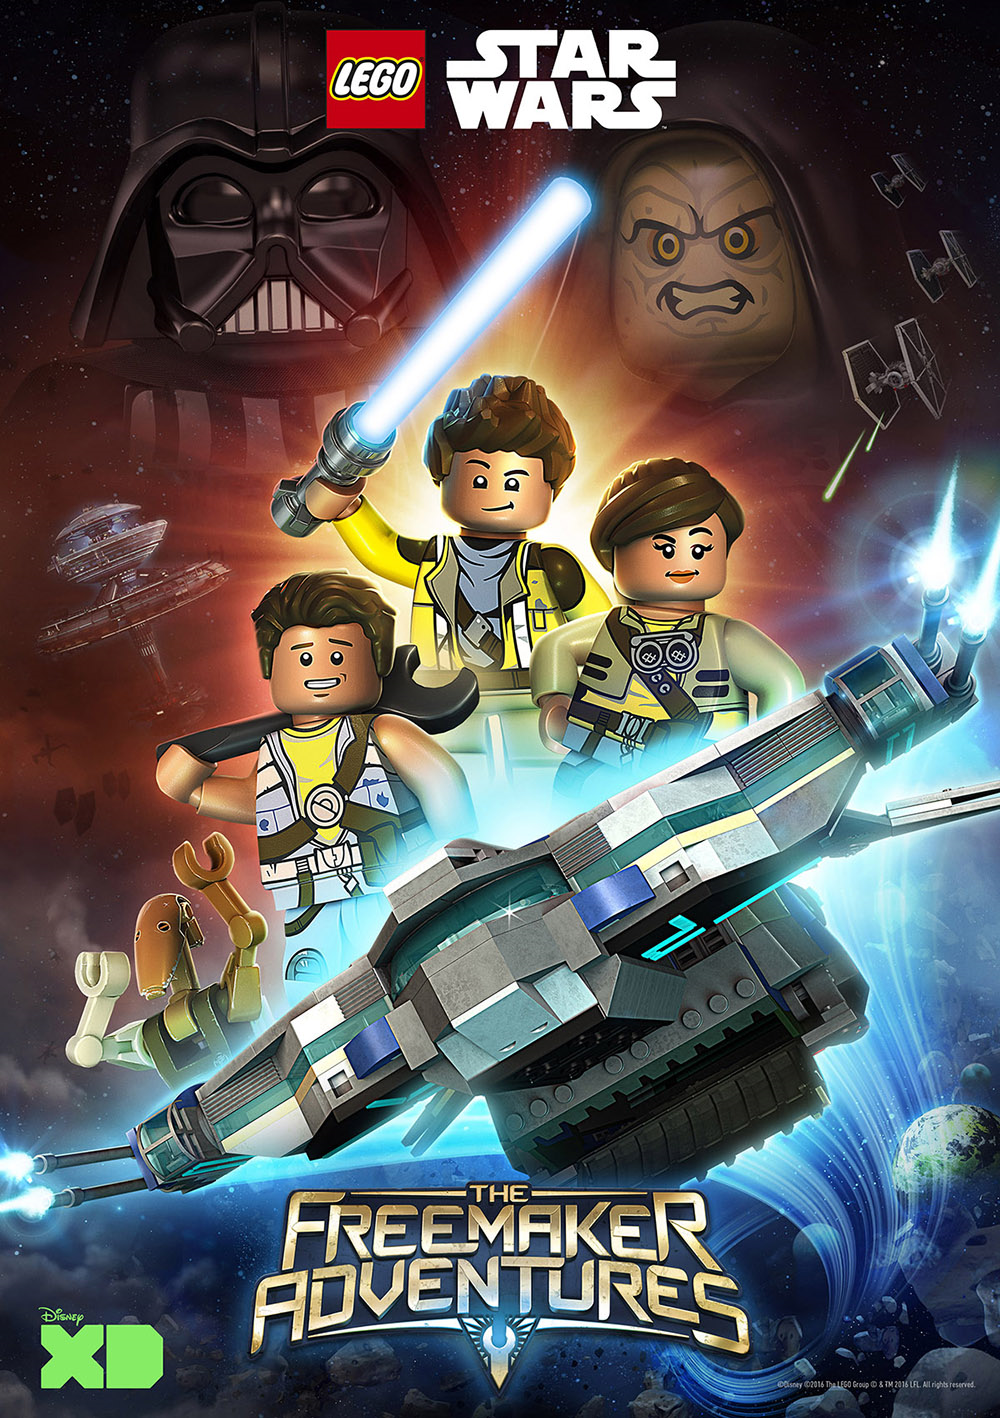 LEGO Star Wars: The Freemaker Adventures is Coming to Disney XD this Summer